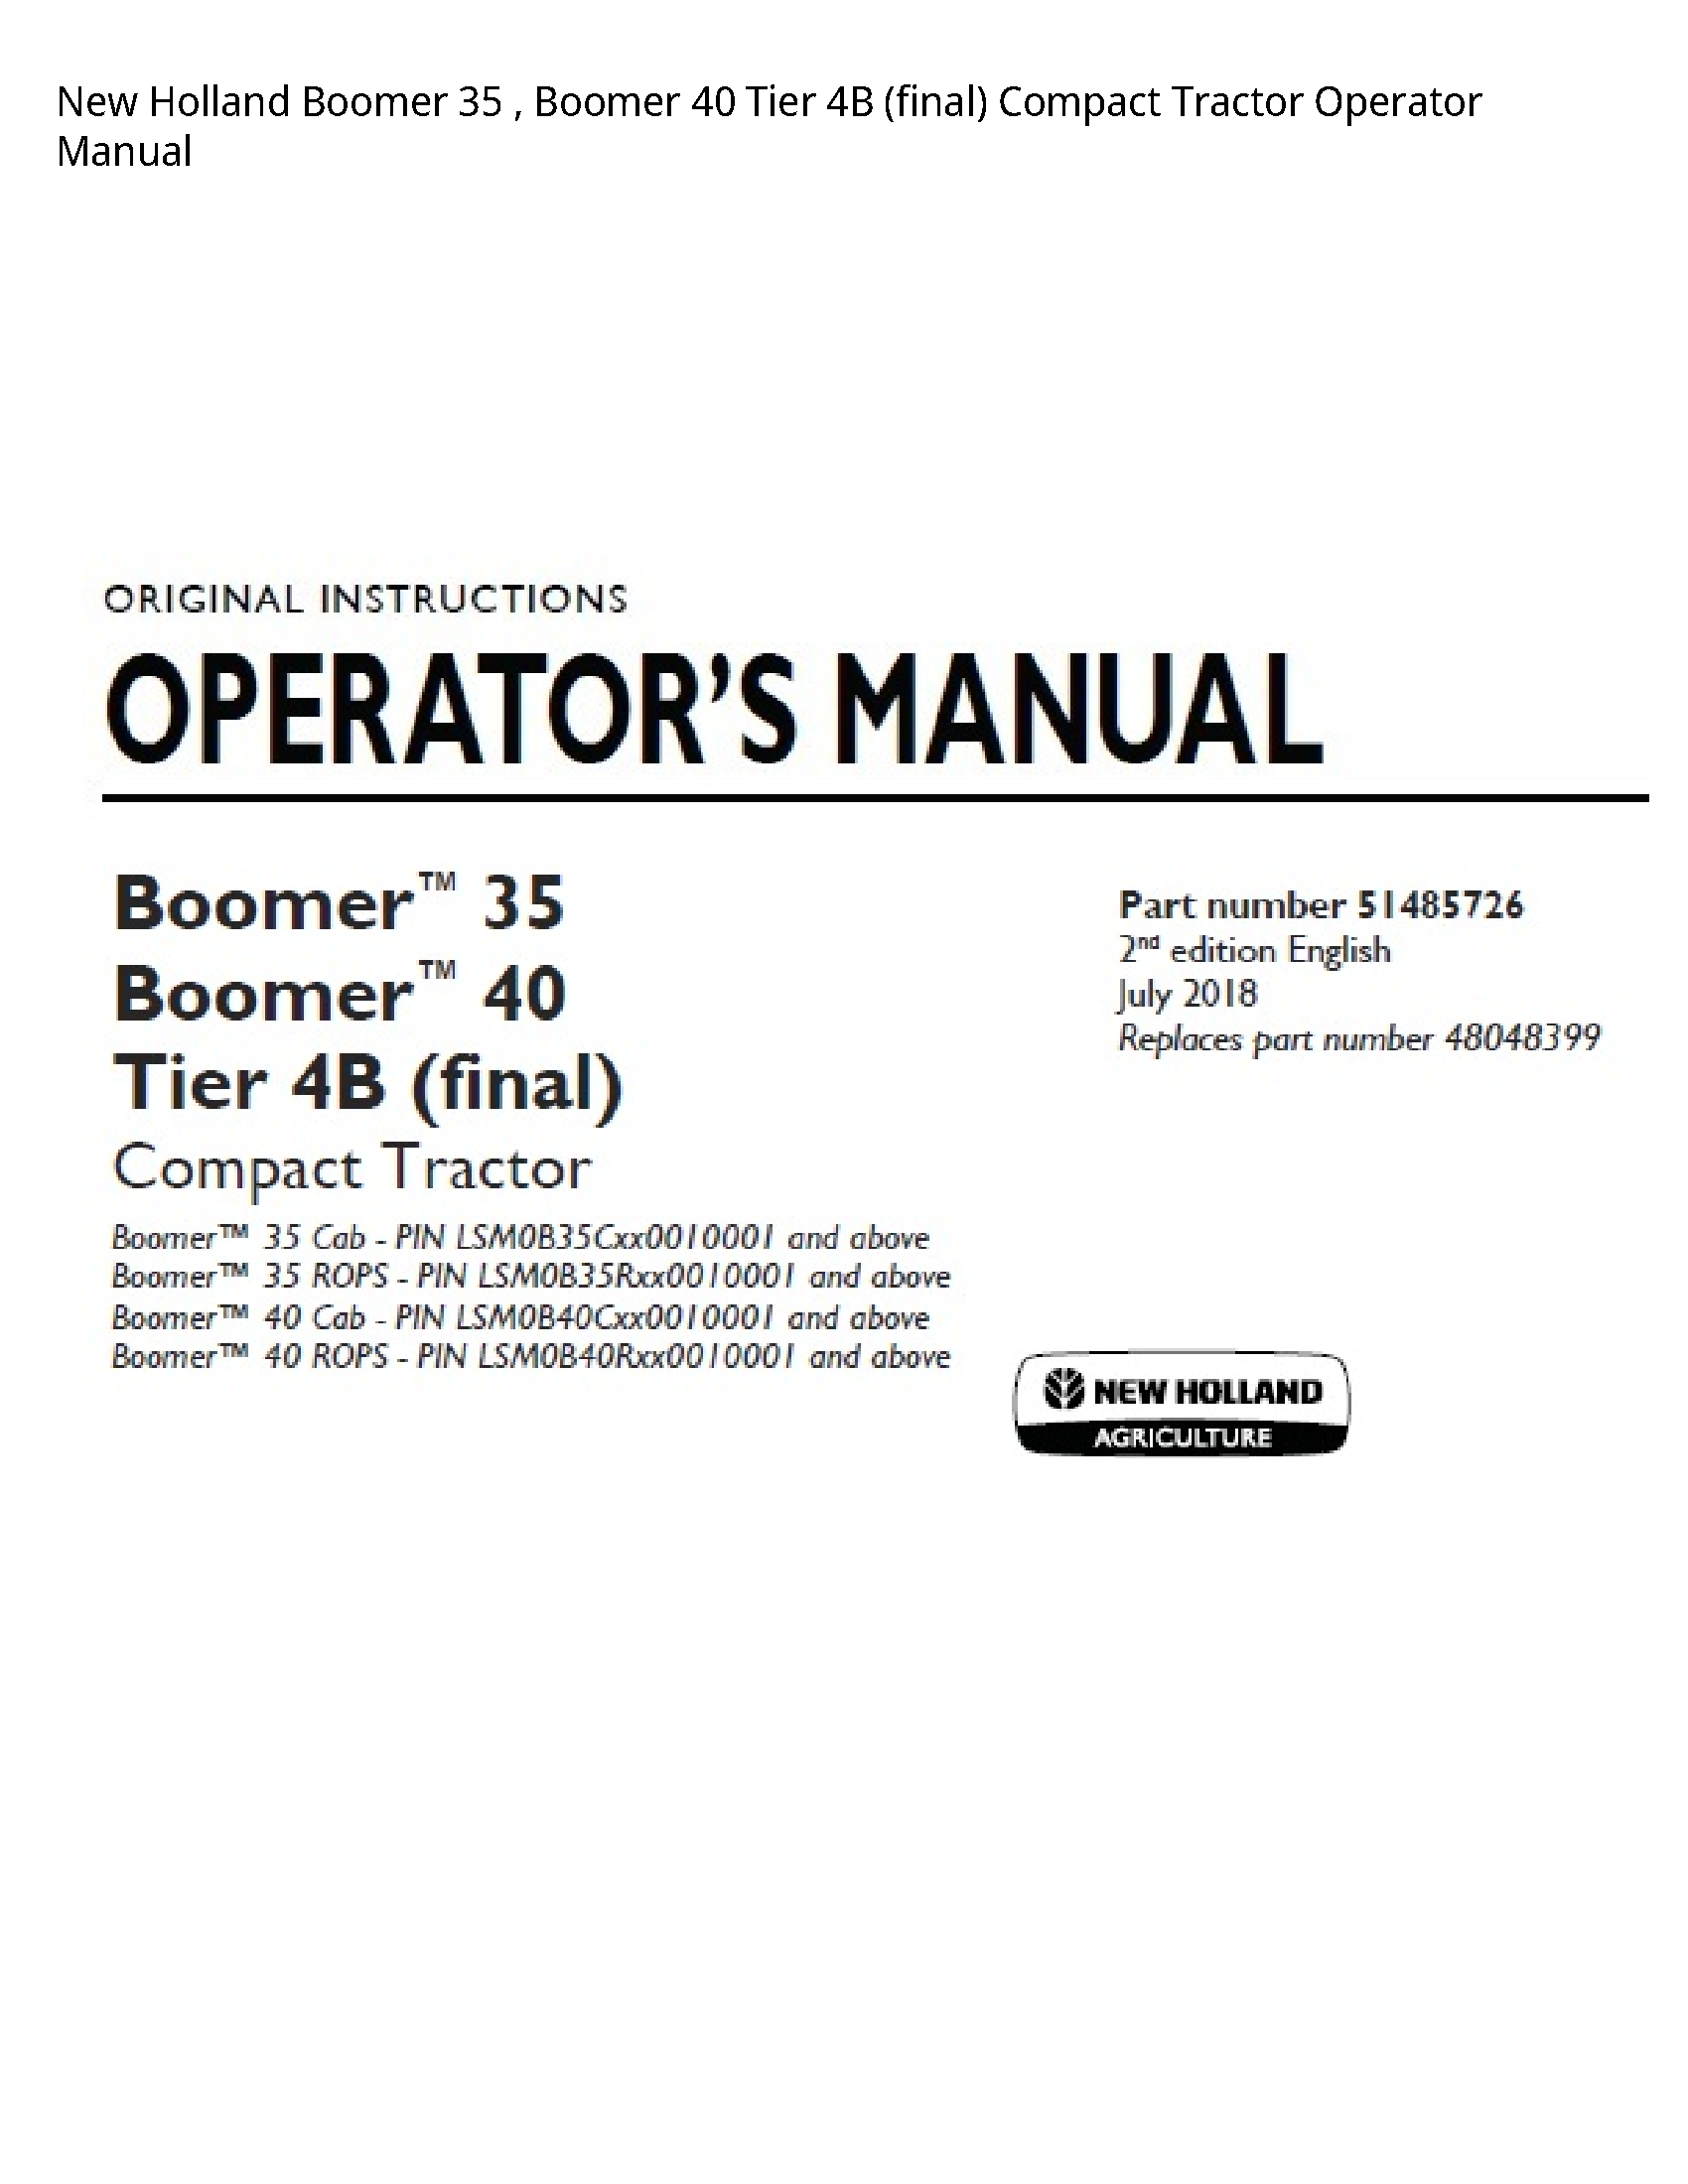 New Holland 35 Boomer Boomer Tier (final) Compact Tractor Operator manual